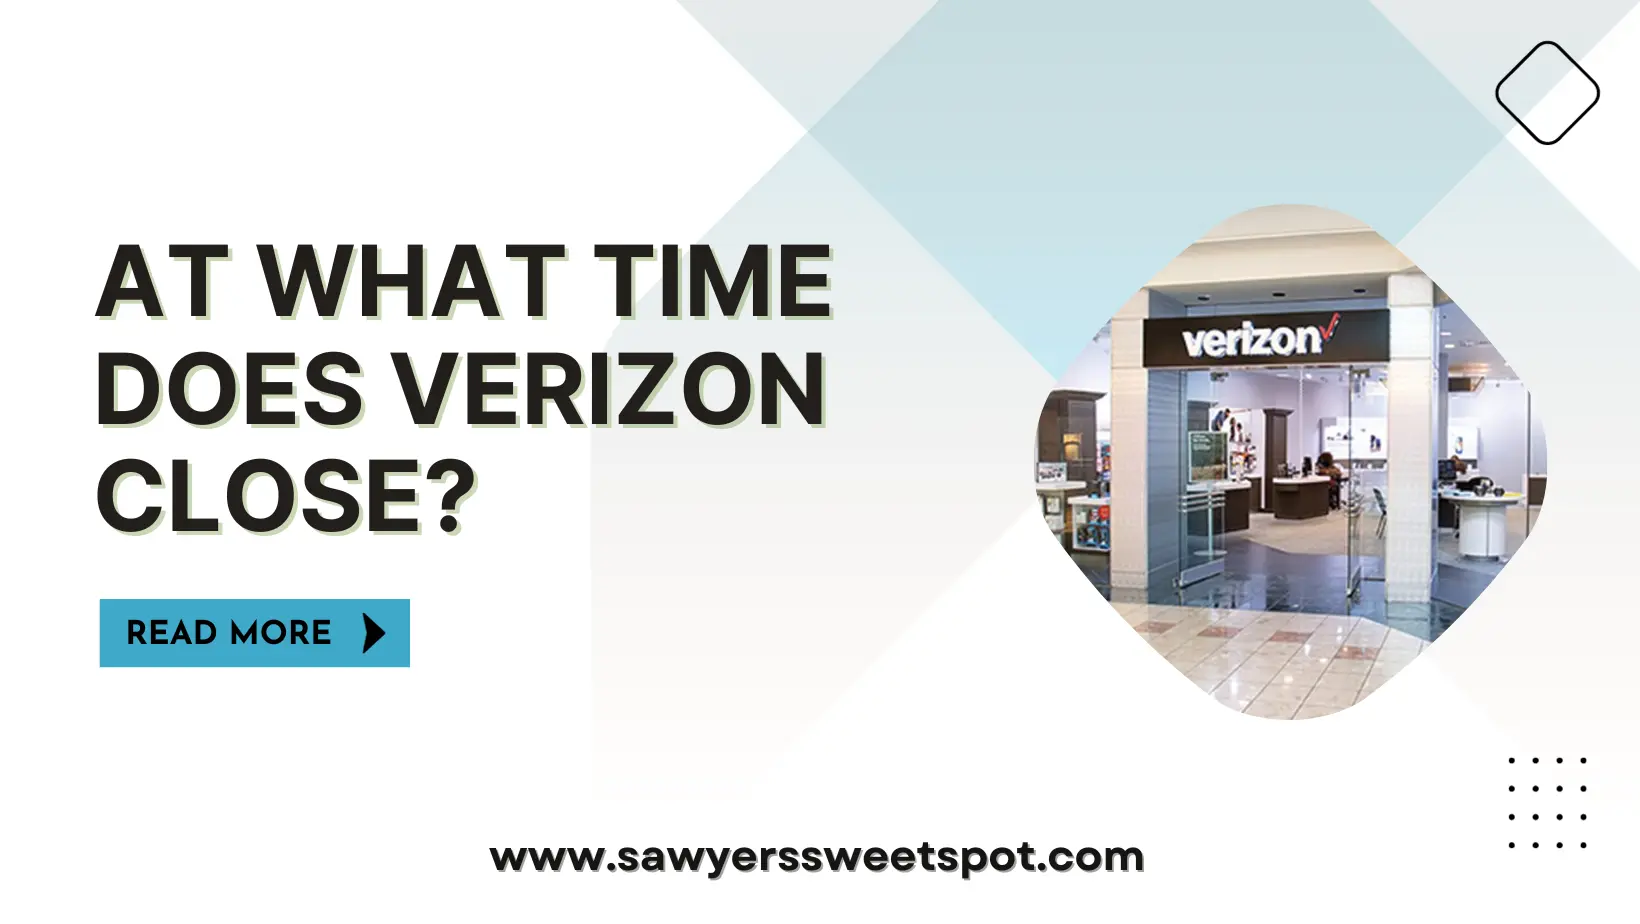 At What Time Does Verizon Close?